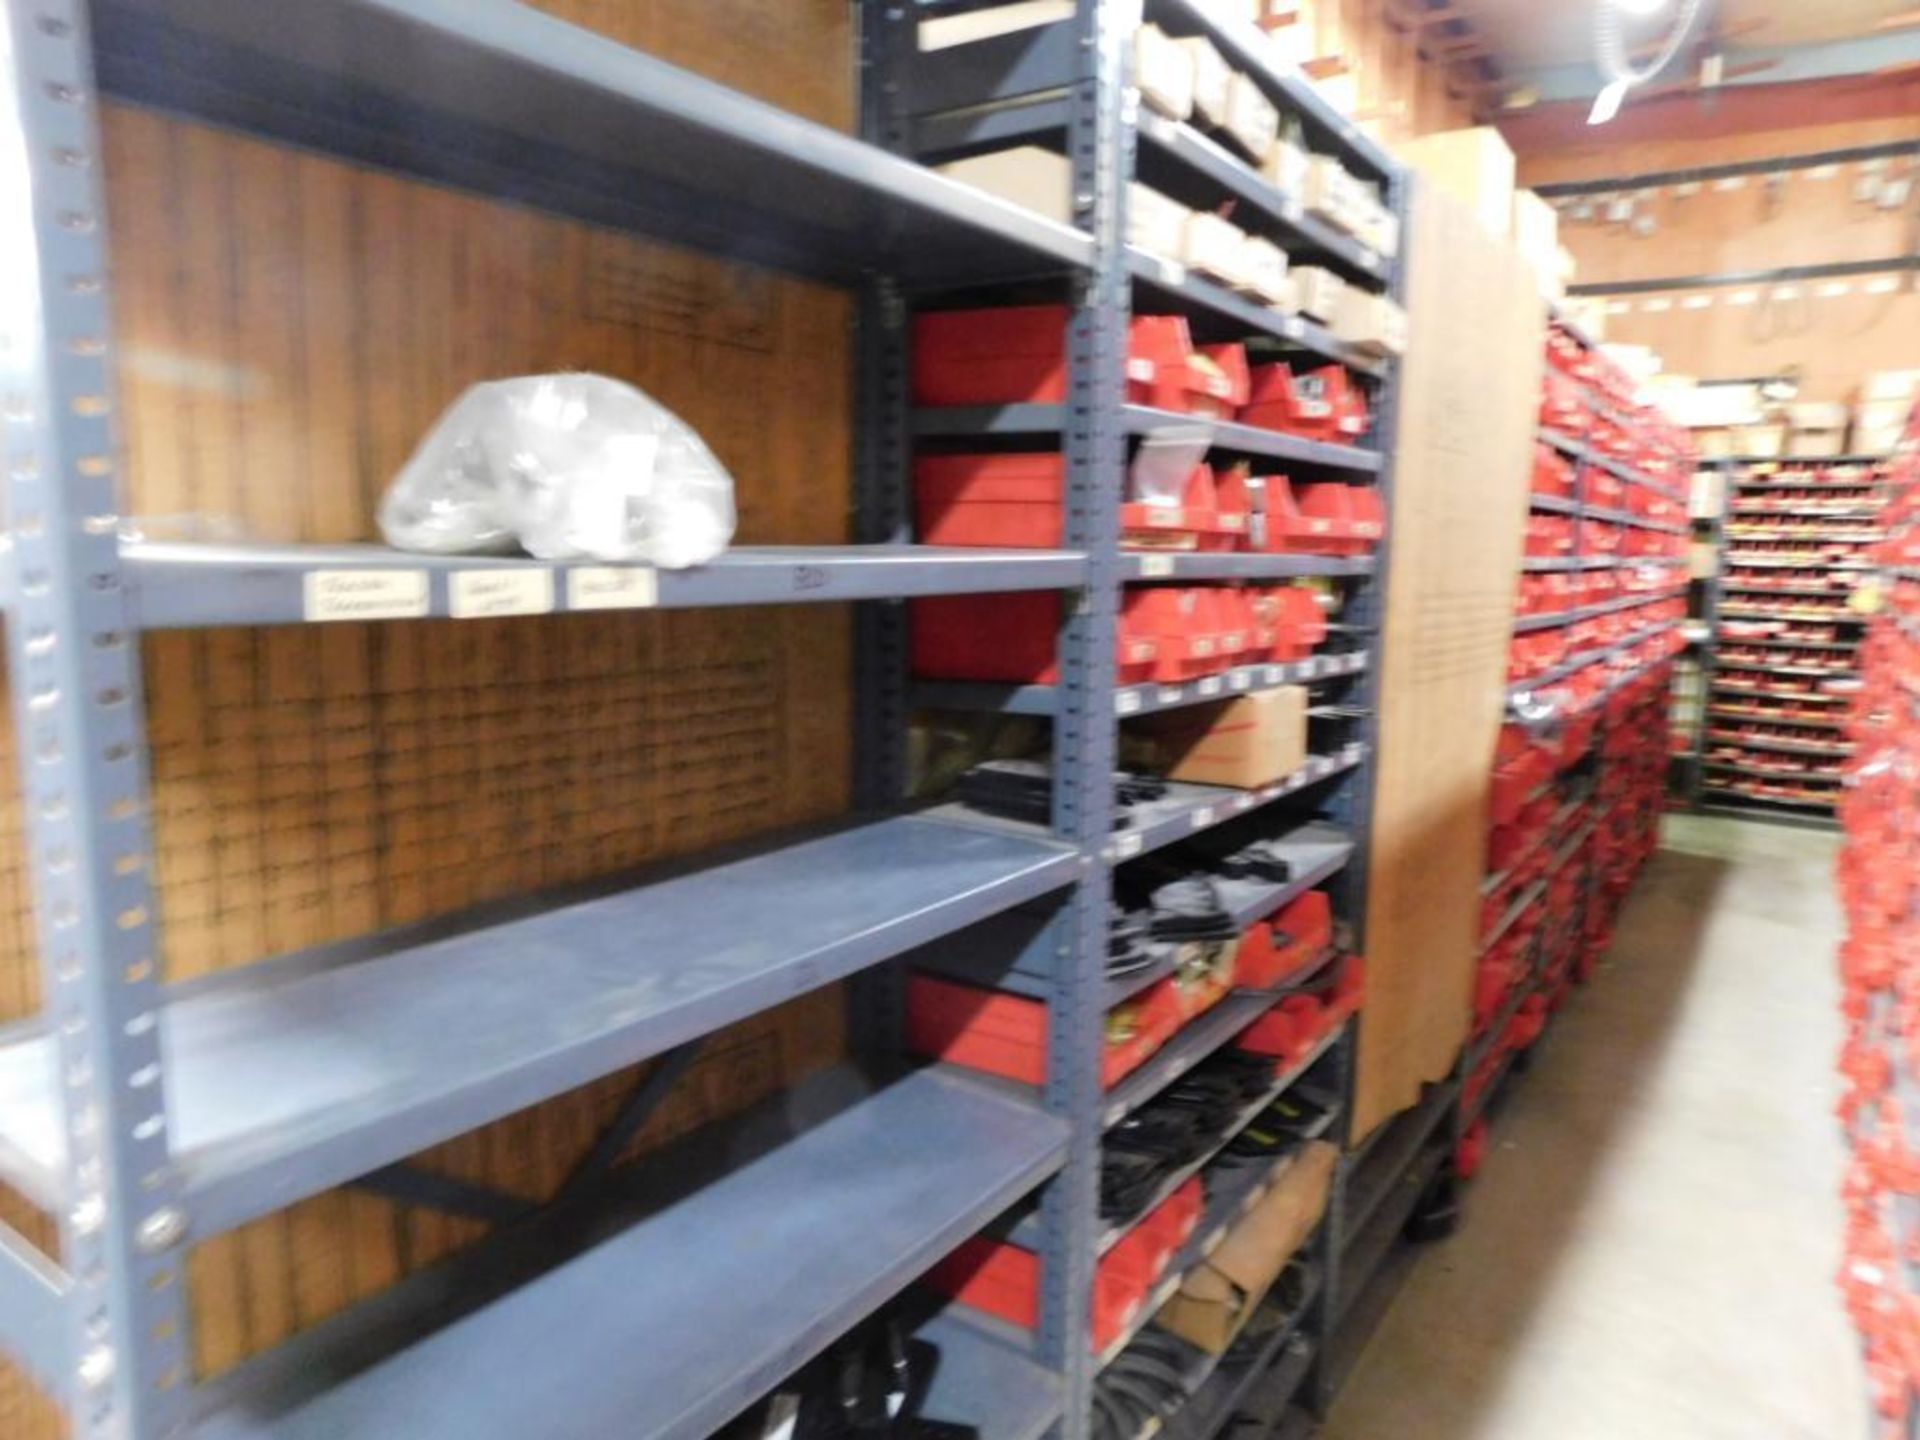 LOT: (1) Row of Steel Shelving (both sides) with Contents of Fertilizer Knives & Accessories, Hardwa - Image 4 of 5